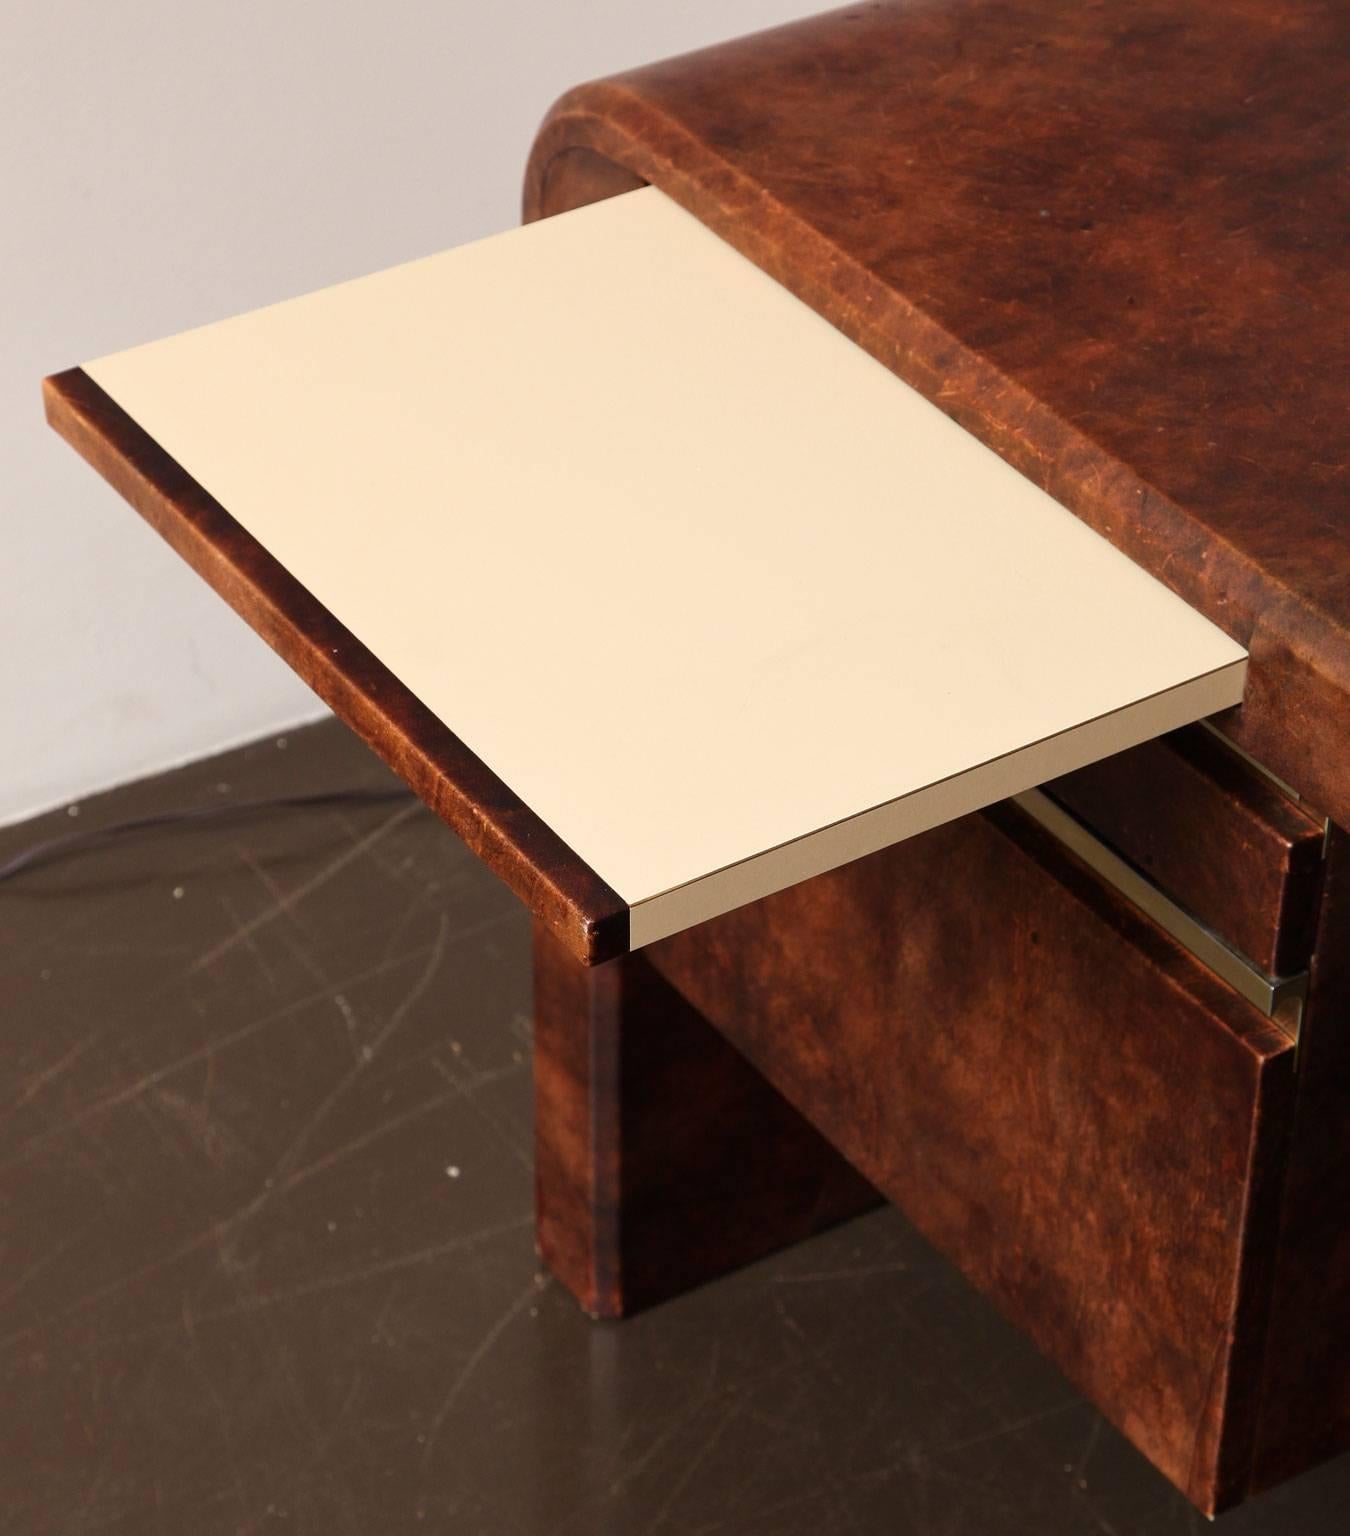 Large waterfall desk by Karl Springer clad in pieced cordovan leather with brass drawer details. Two drawers on each side with a pull-out laminate-topped shelf above,
American, circa 1980.